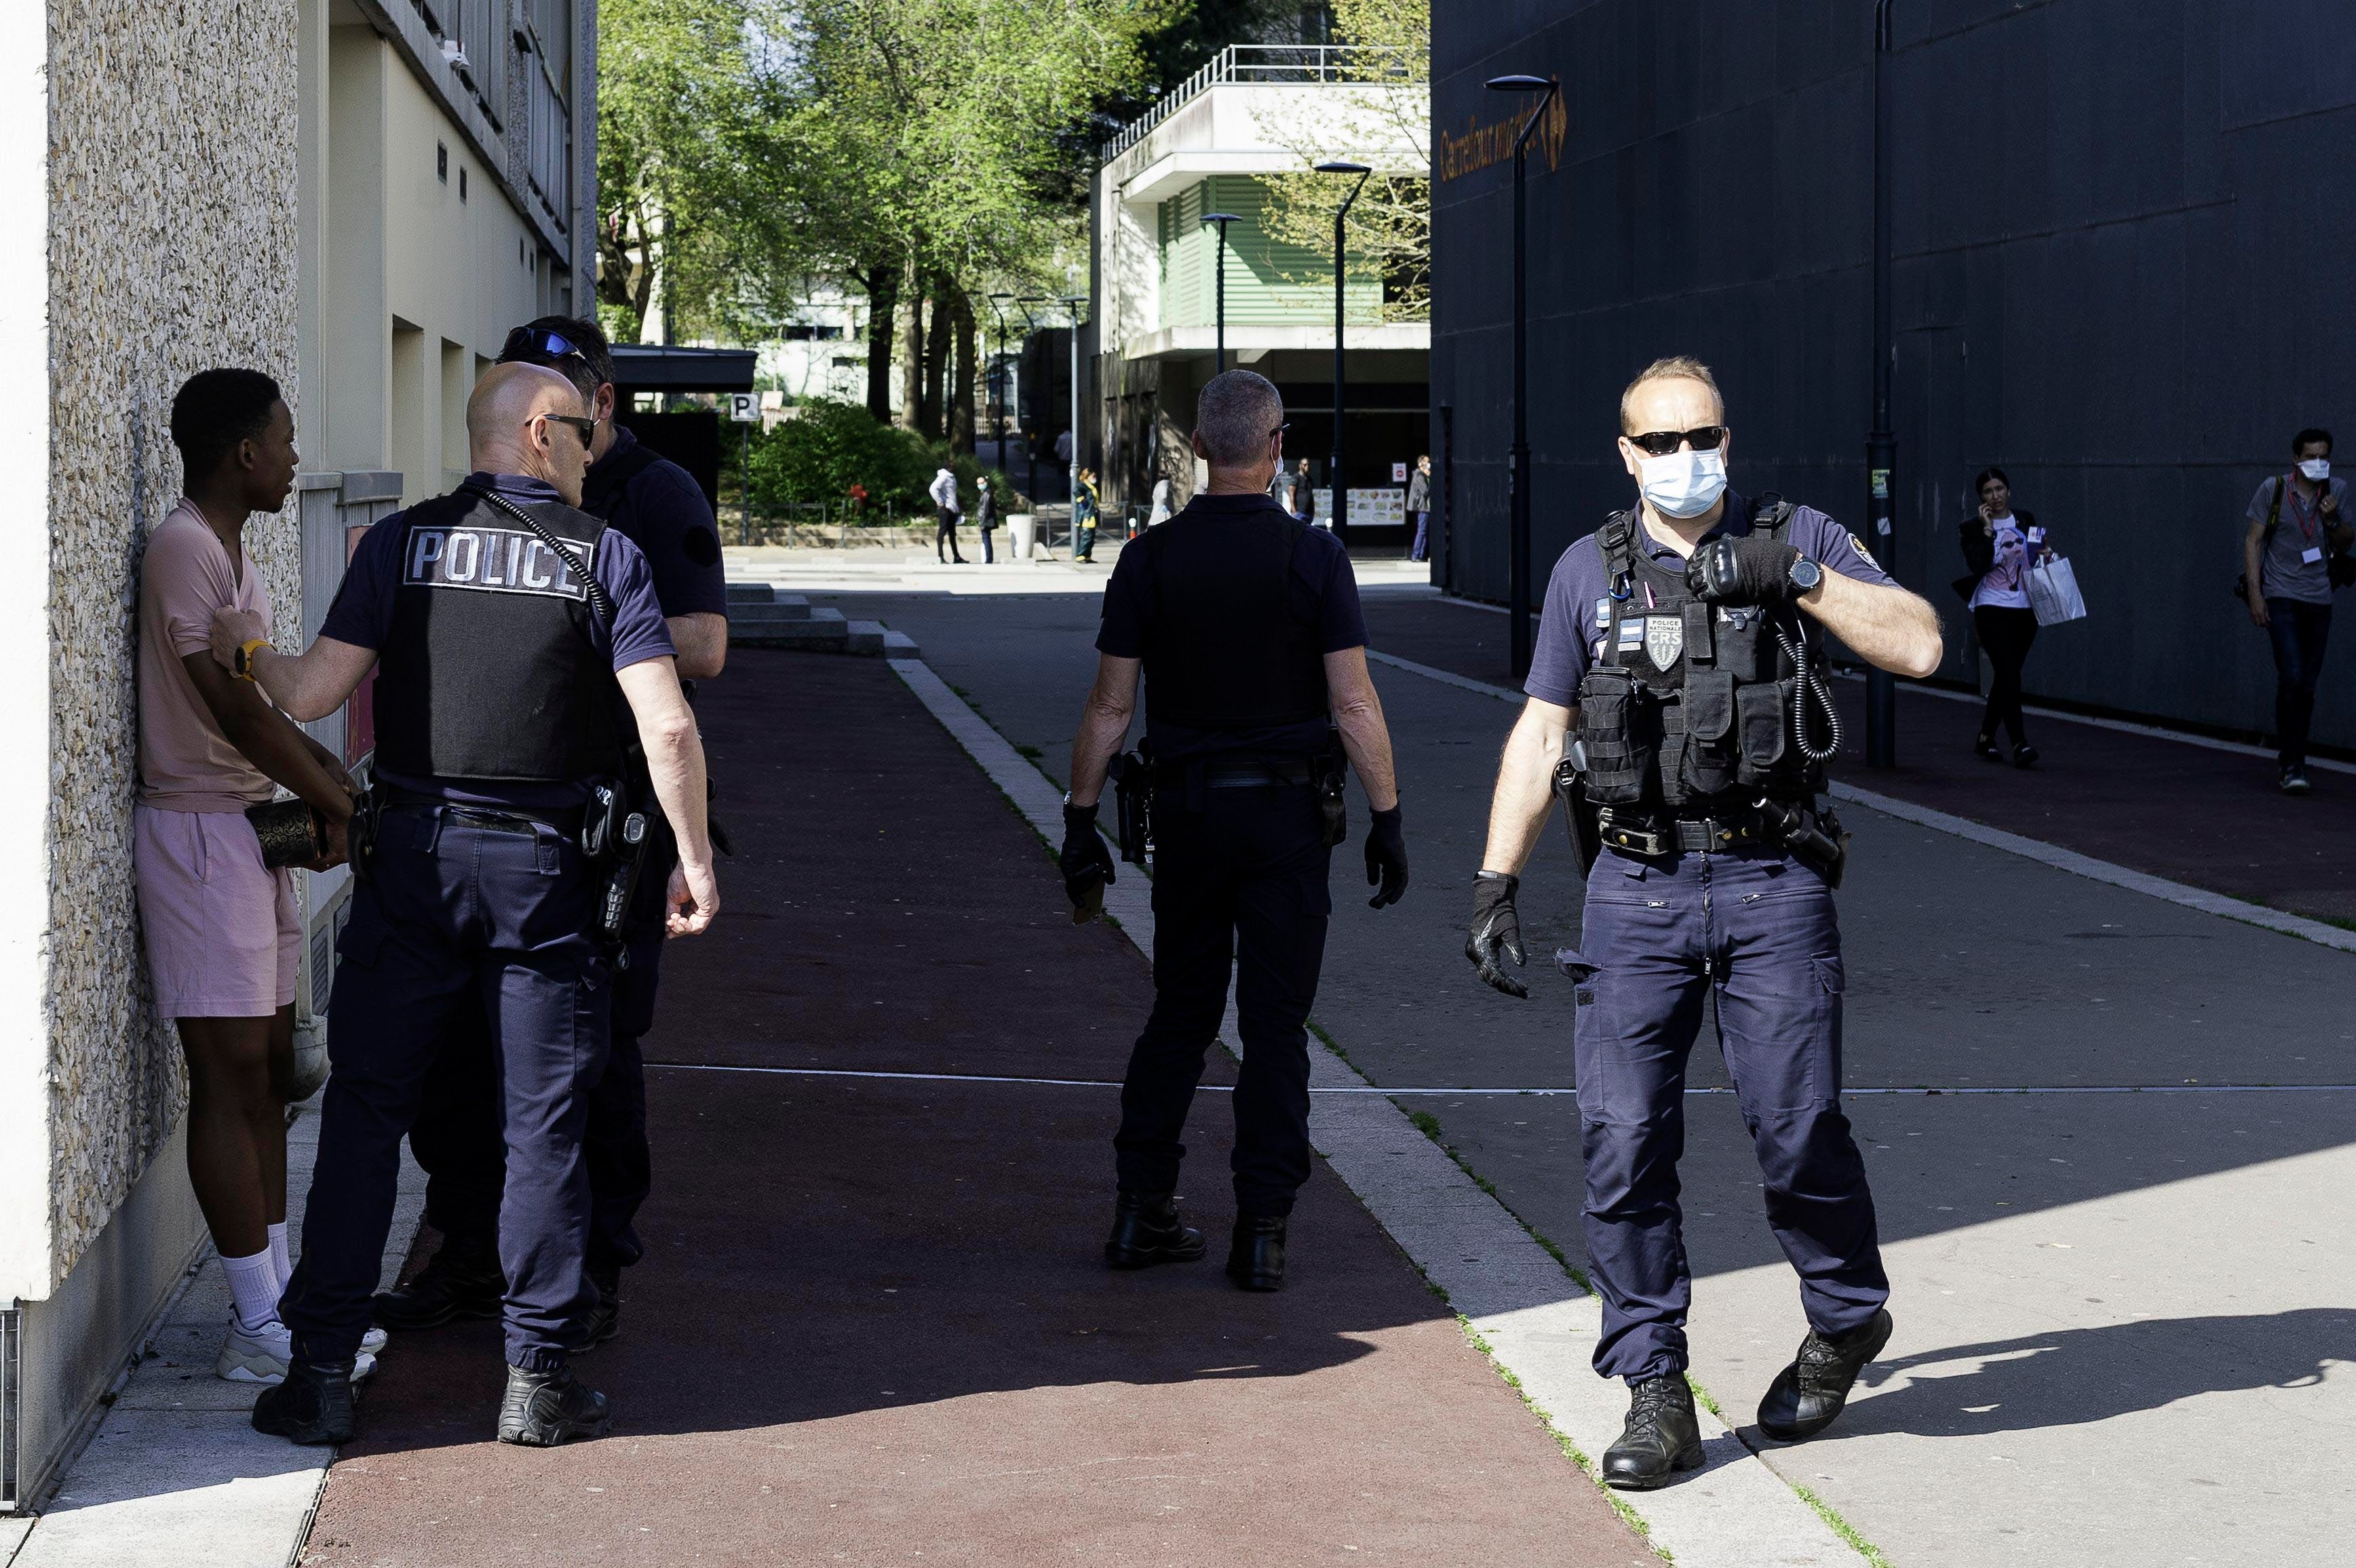 Police agents check identity documents of passerby during the lockdown in Rennes, France. April 11, 2020. 